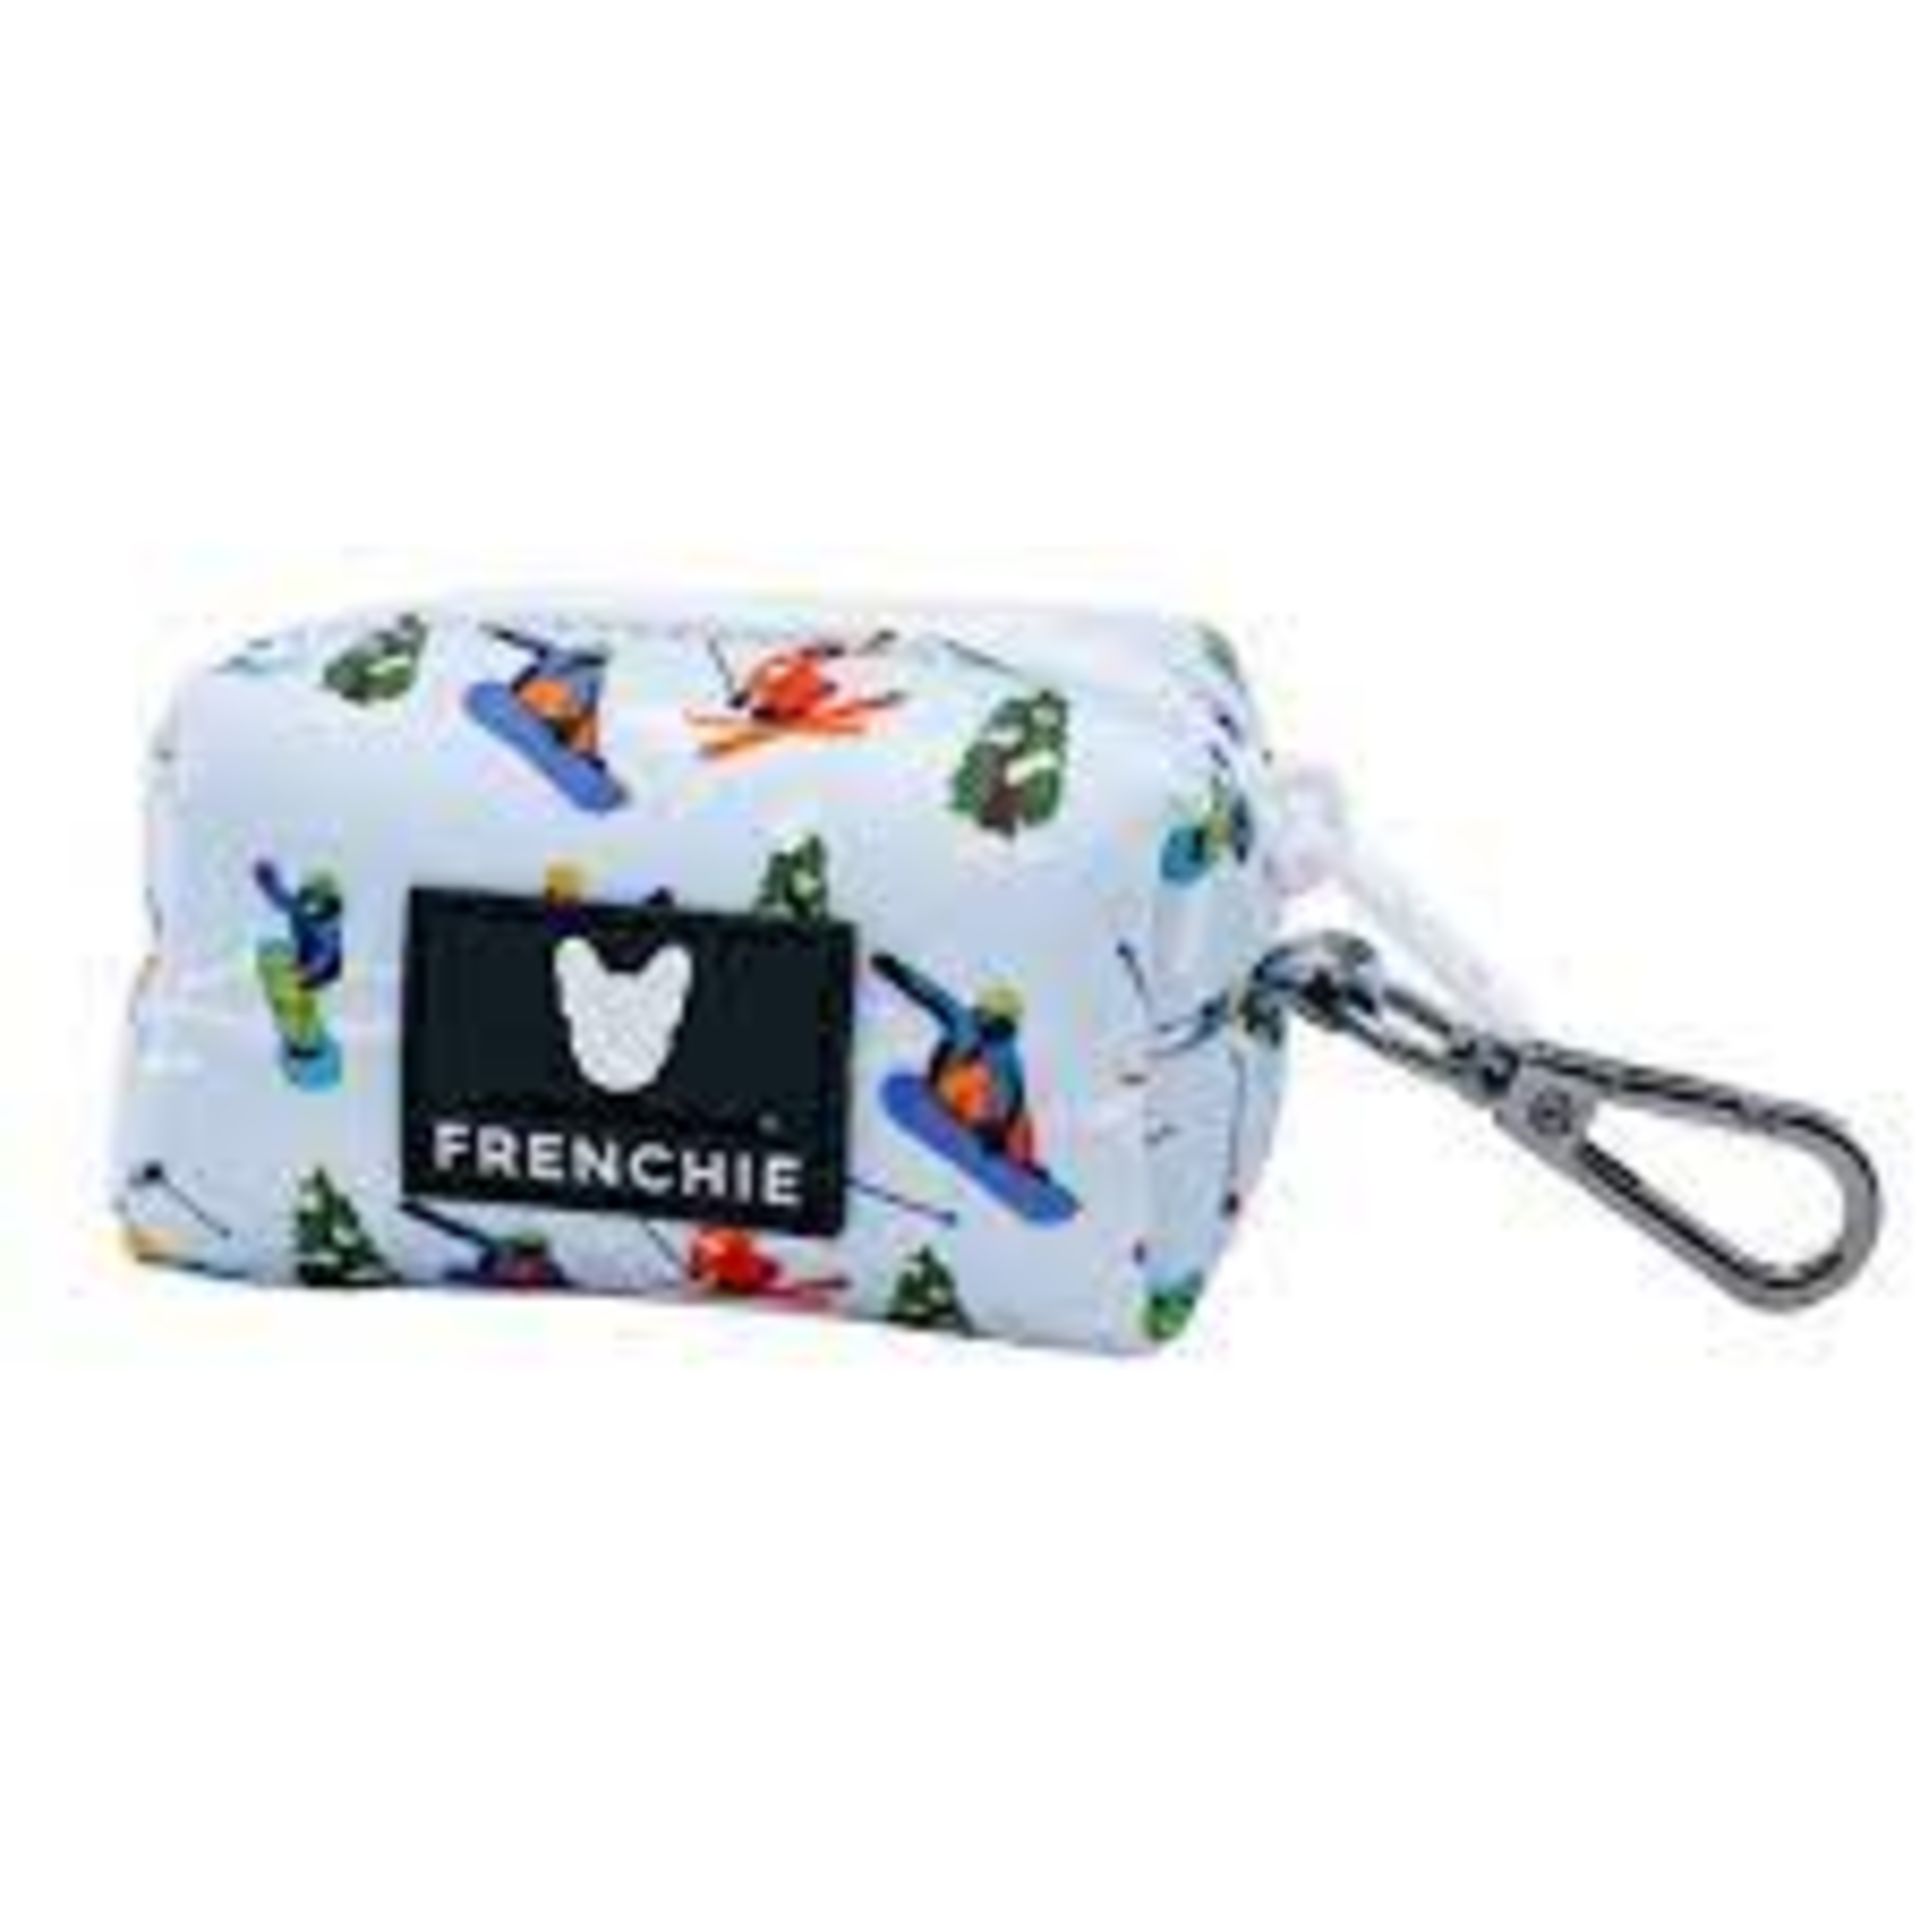 Trade Lot 100 X New .Packaged Frenchie The Bulldog Luxury Branded Dog Products. May include items - Image 16 of 50